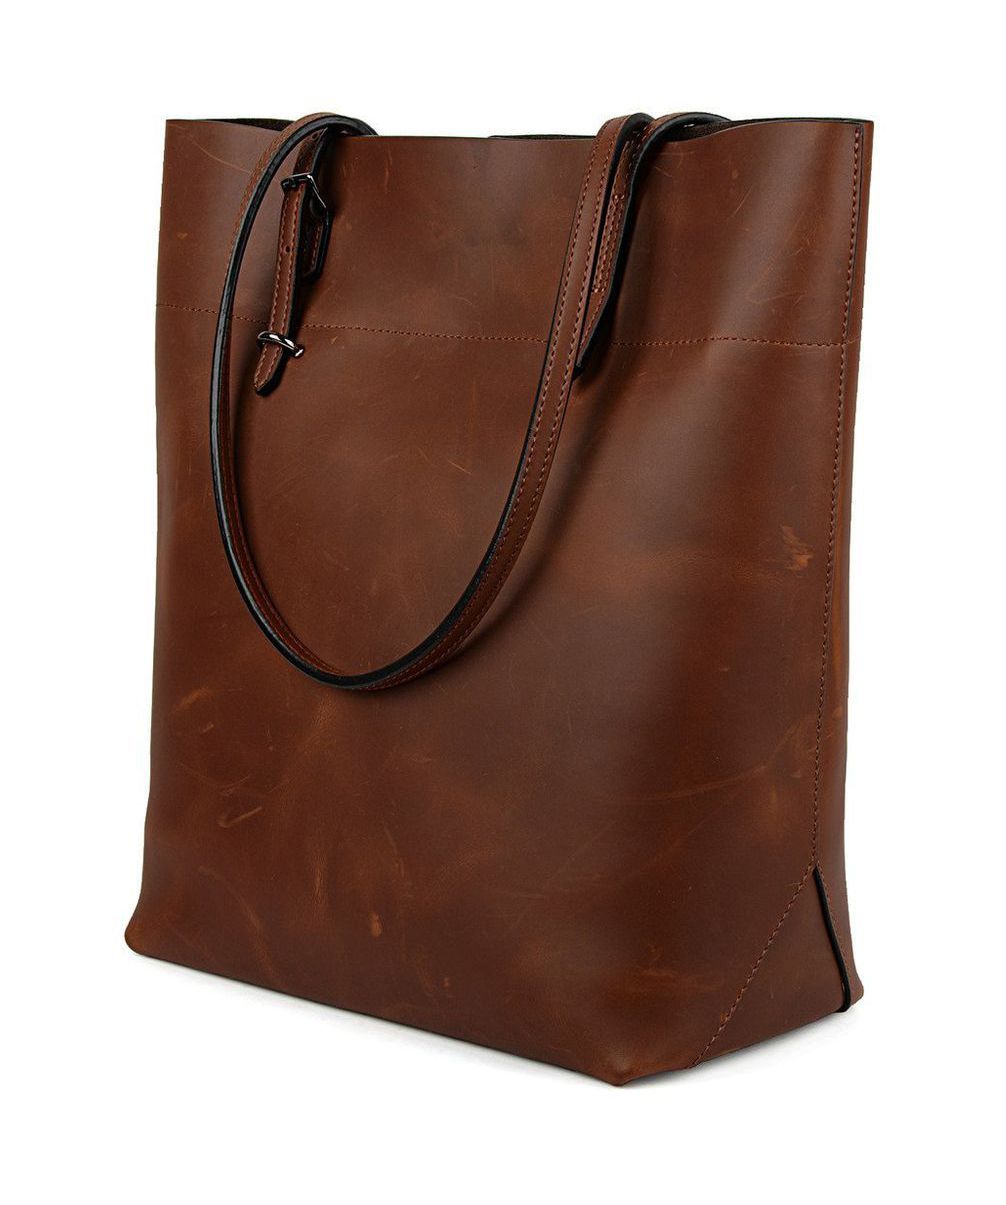 YALUXE Vintage Style Leather Tote 